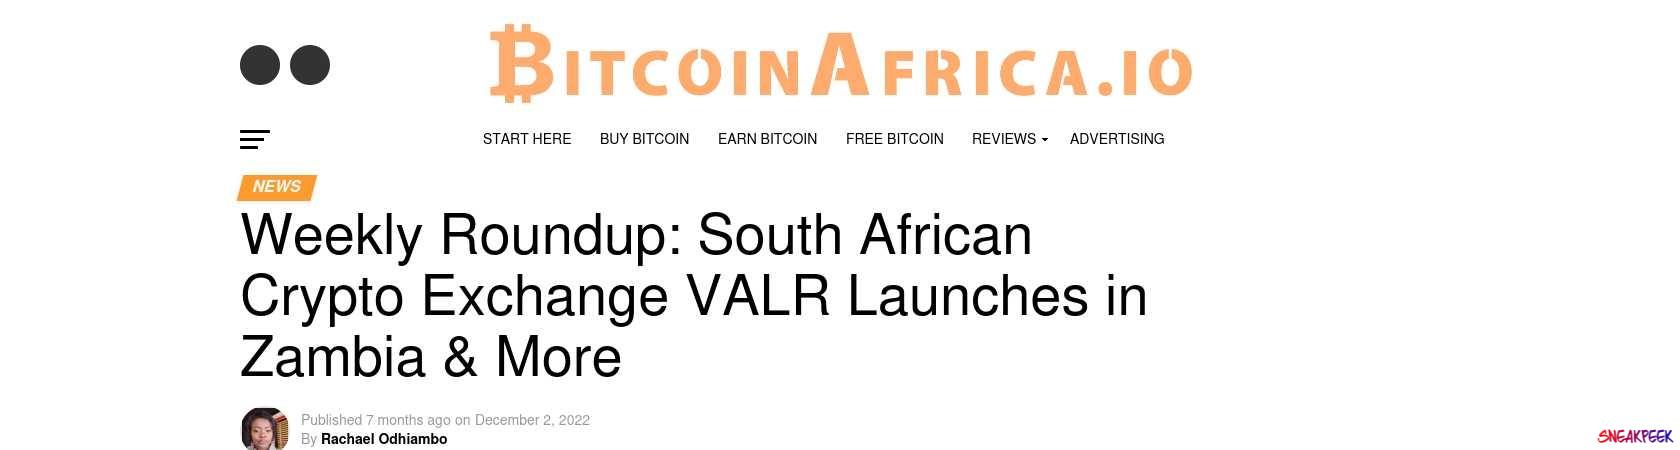 Read the full Article:  ⭲ Weekly Roundup: South African Crypto Exchange VALR Launches in Zambia & More